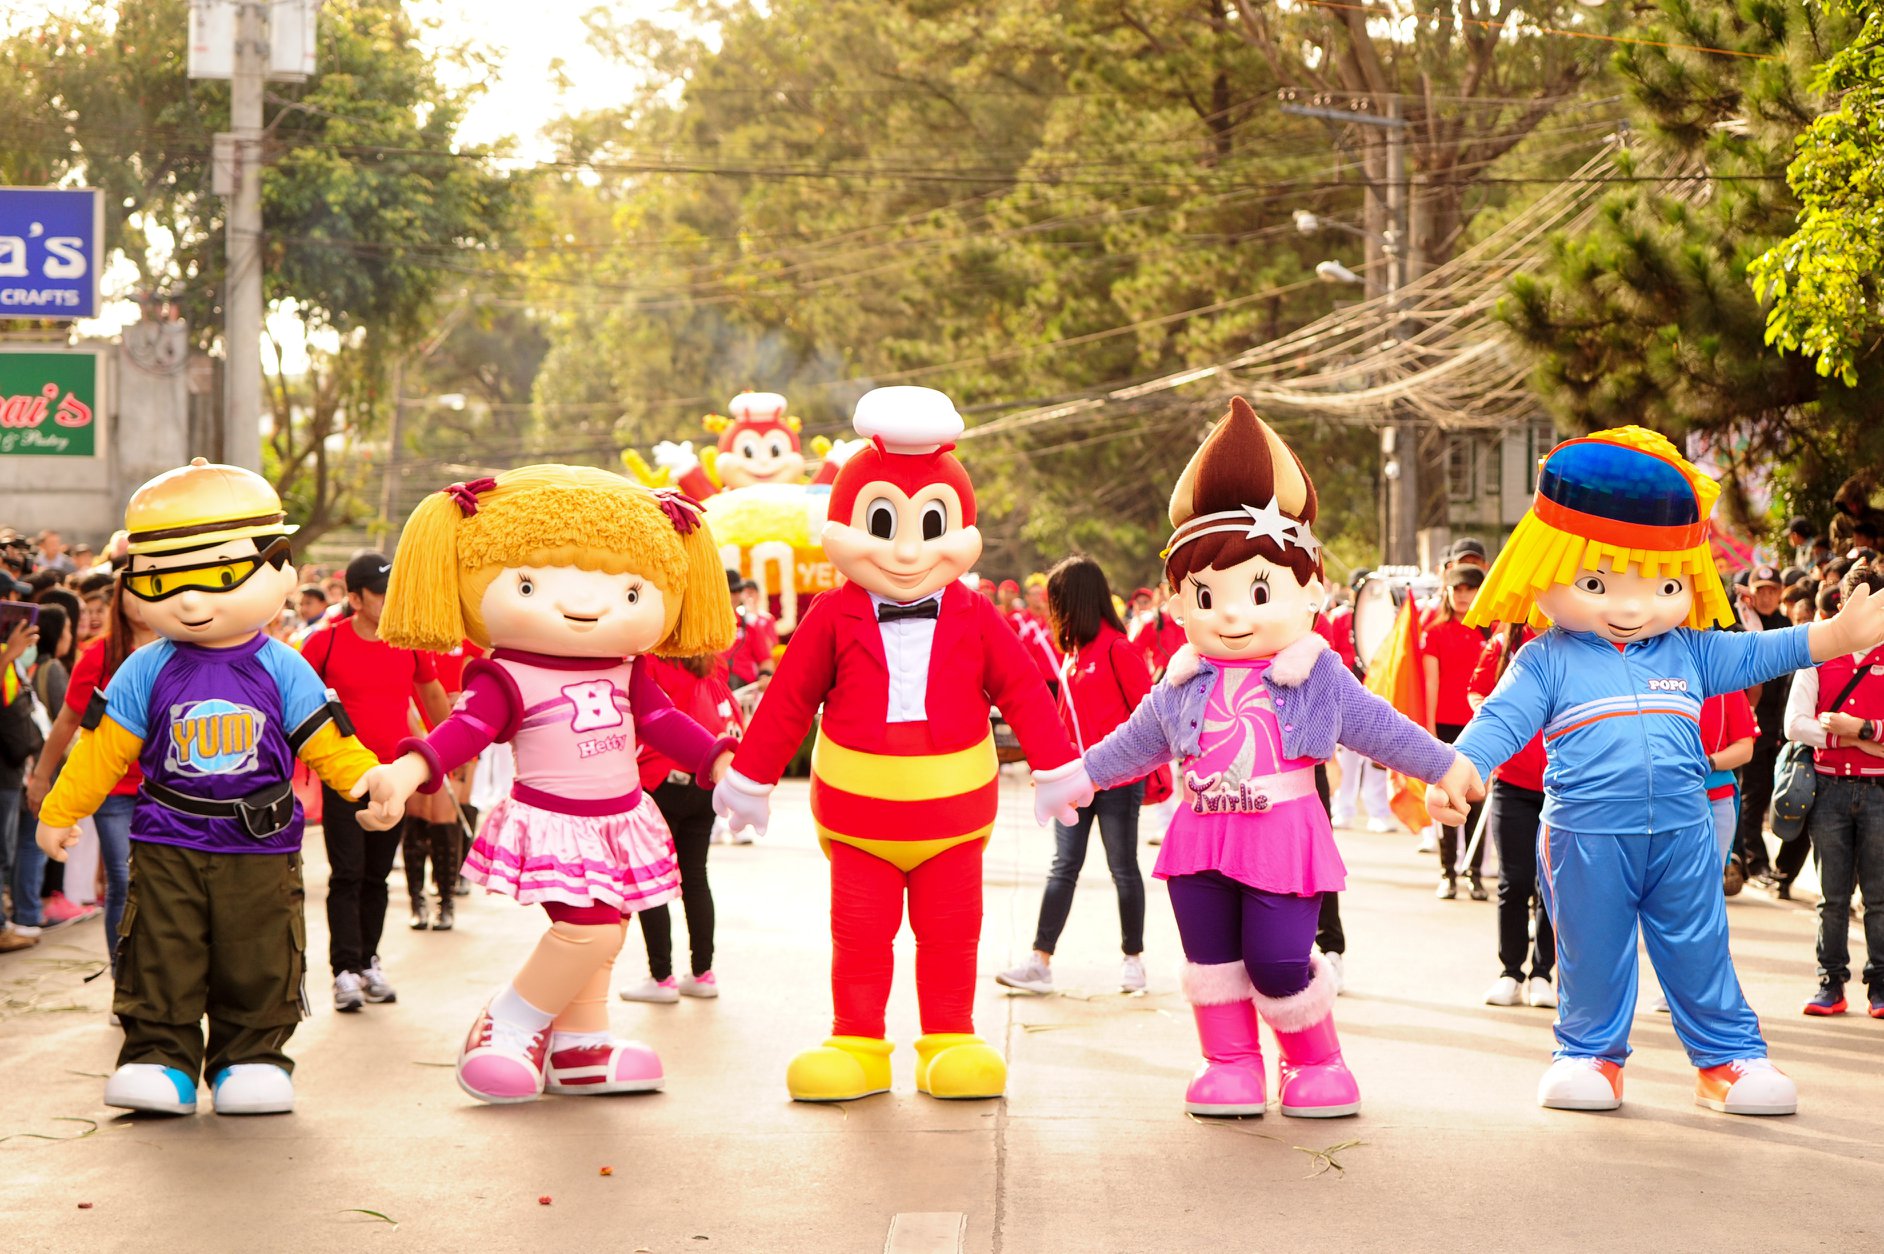 4 things we want to see in the future Jollibee Japan - NOLISOLI